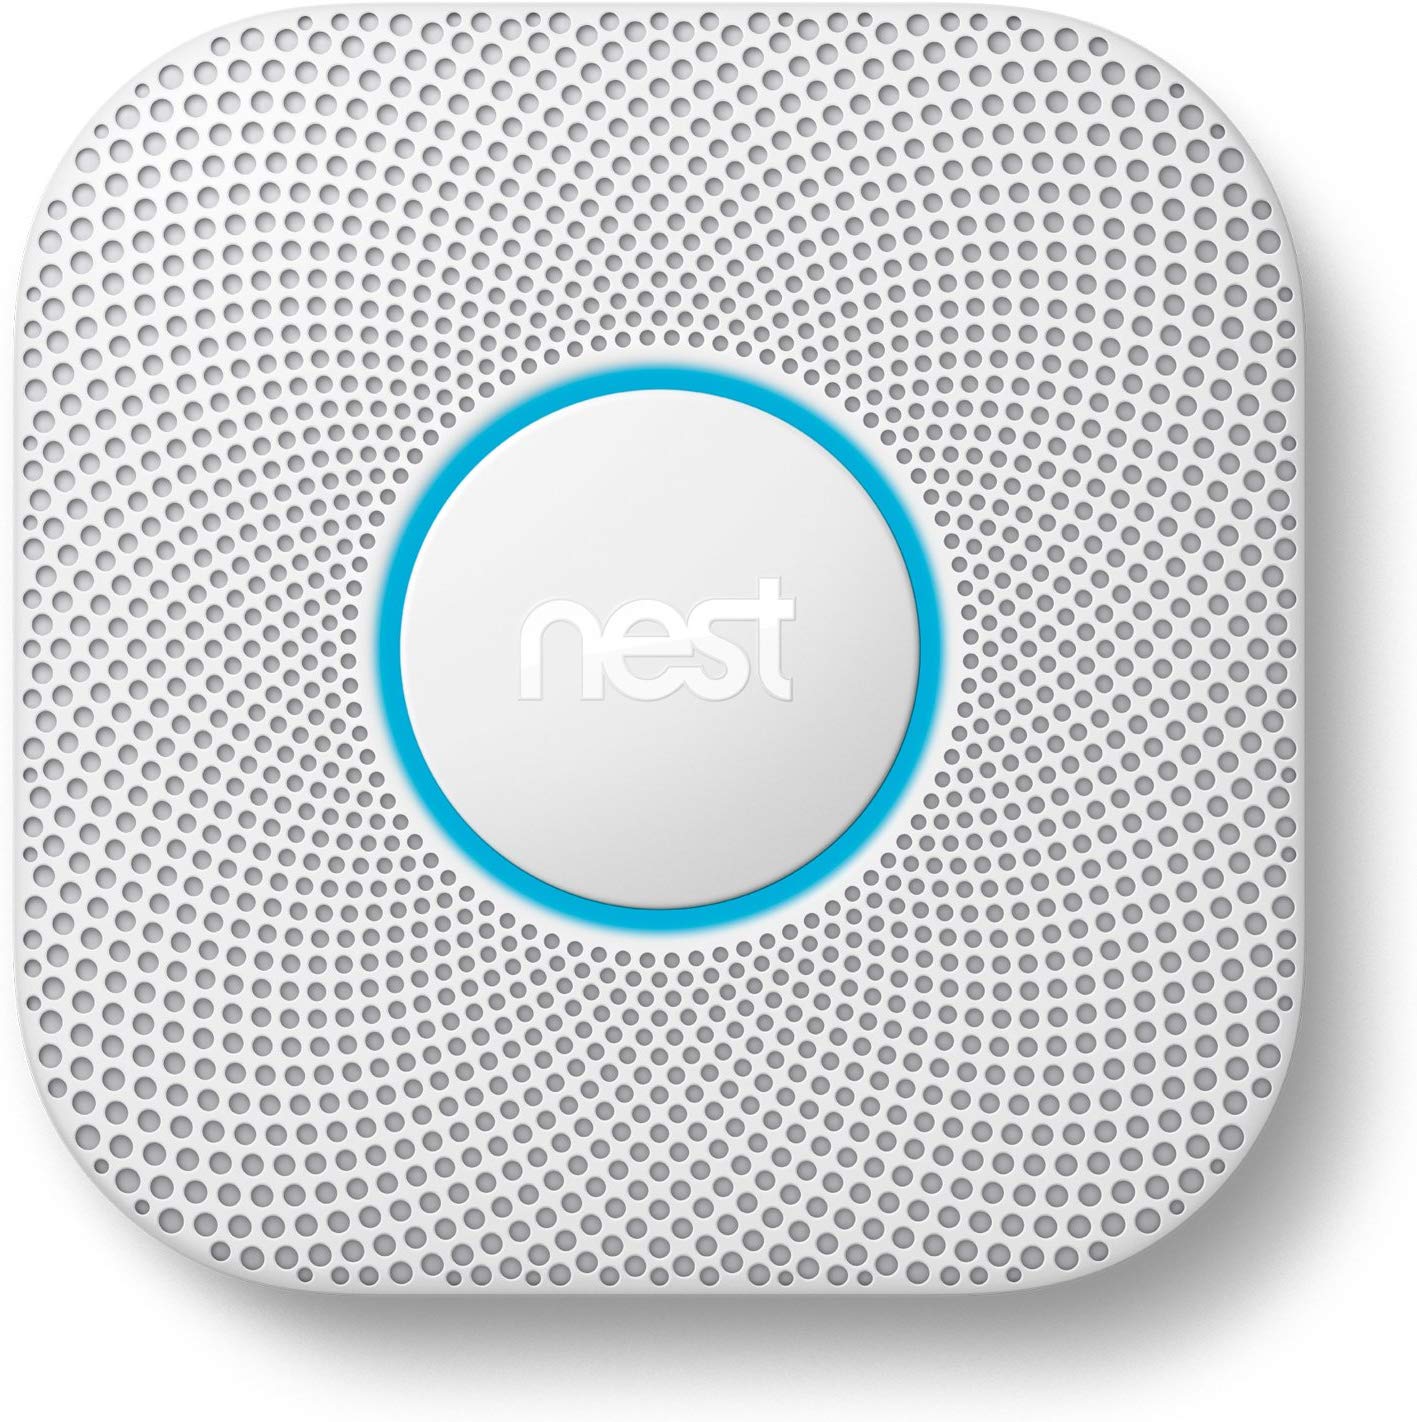 Nest Protect Smoke and Carbon Monoxide Alarm (2nd Generation) - White (Certified Refurbished)